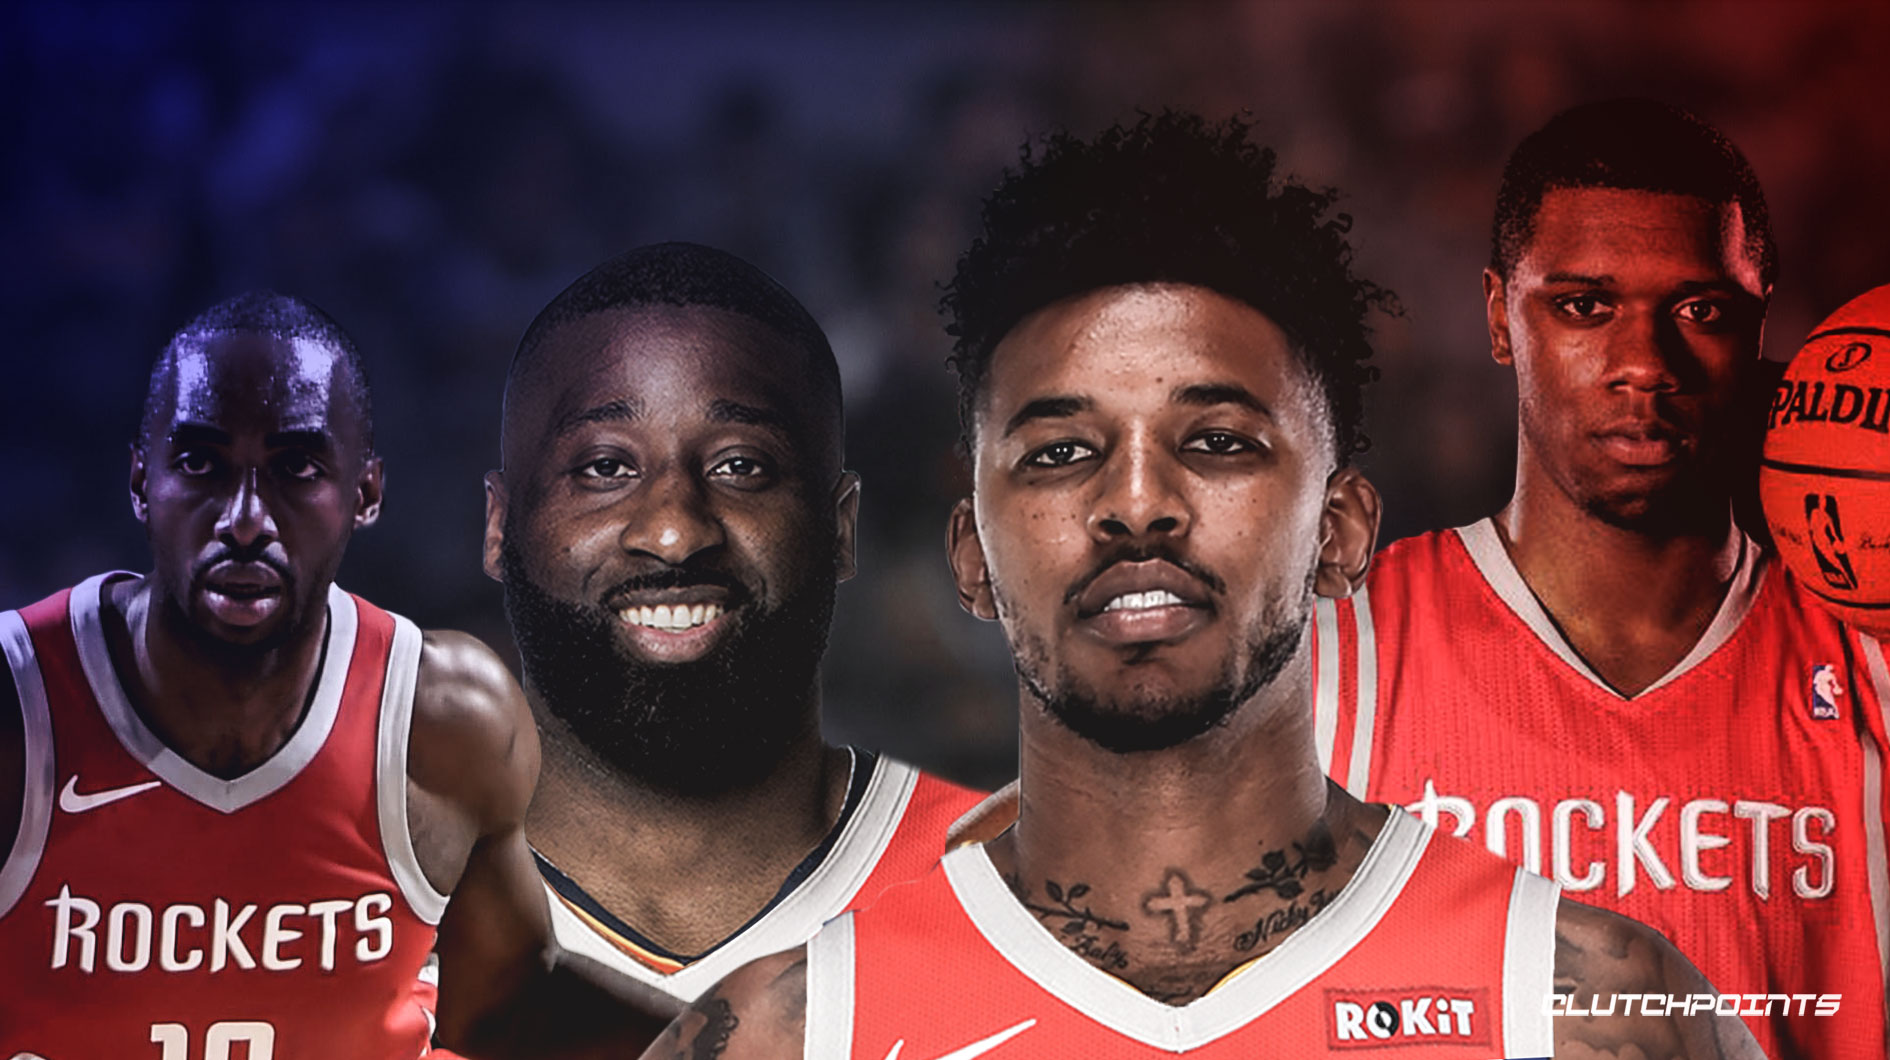 Rockets, Nick Young, Terrence Jones, Luc Mbah a Moute, Corey Brewer